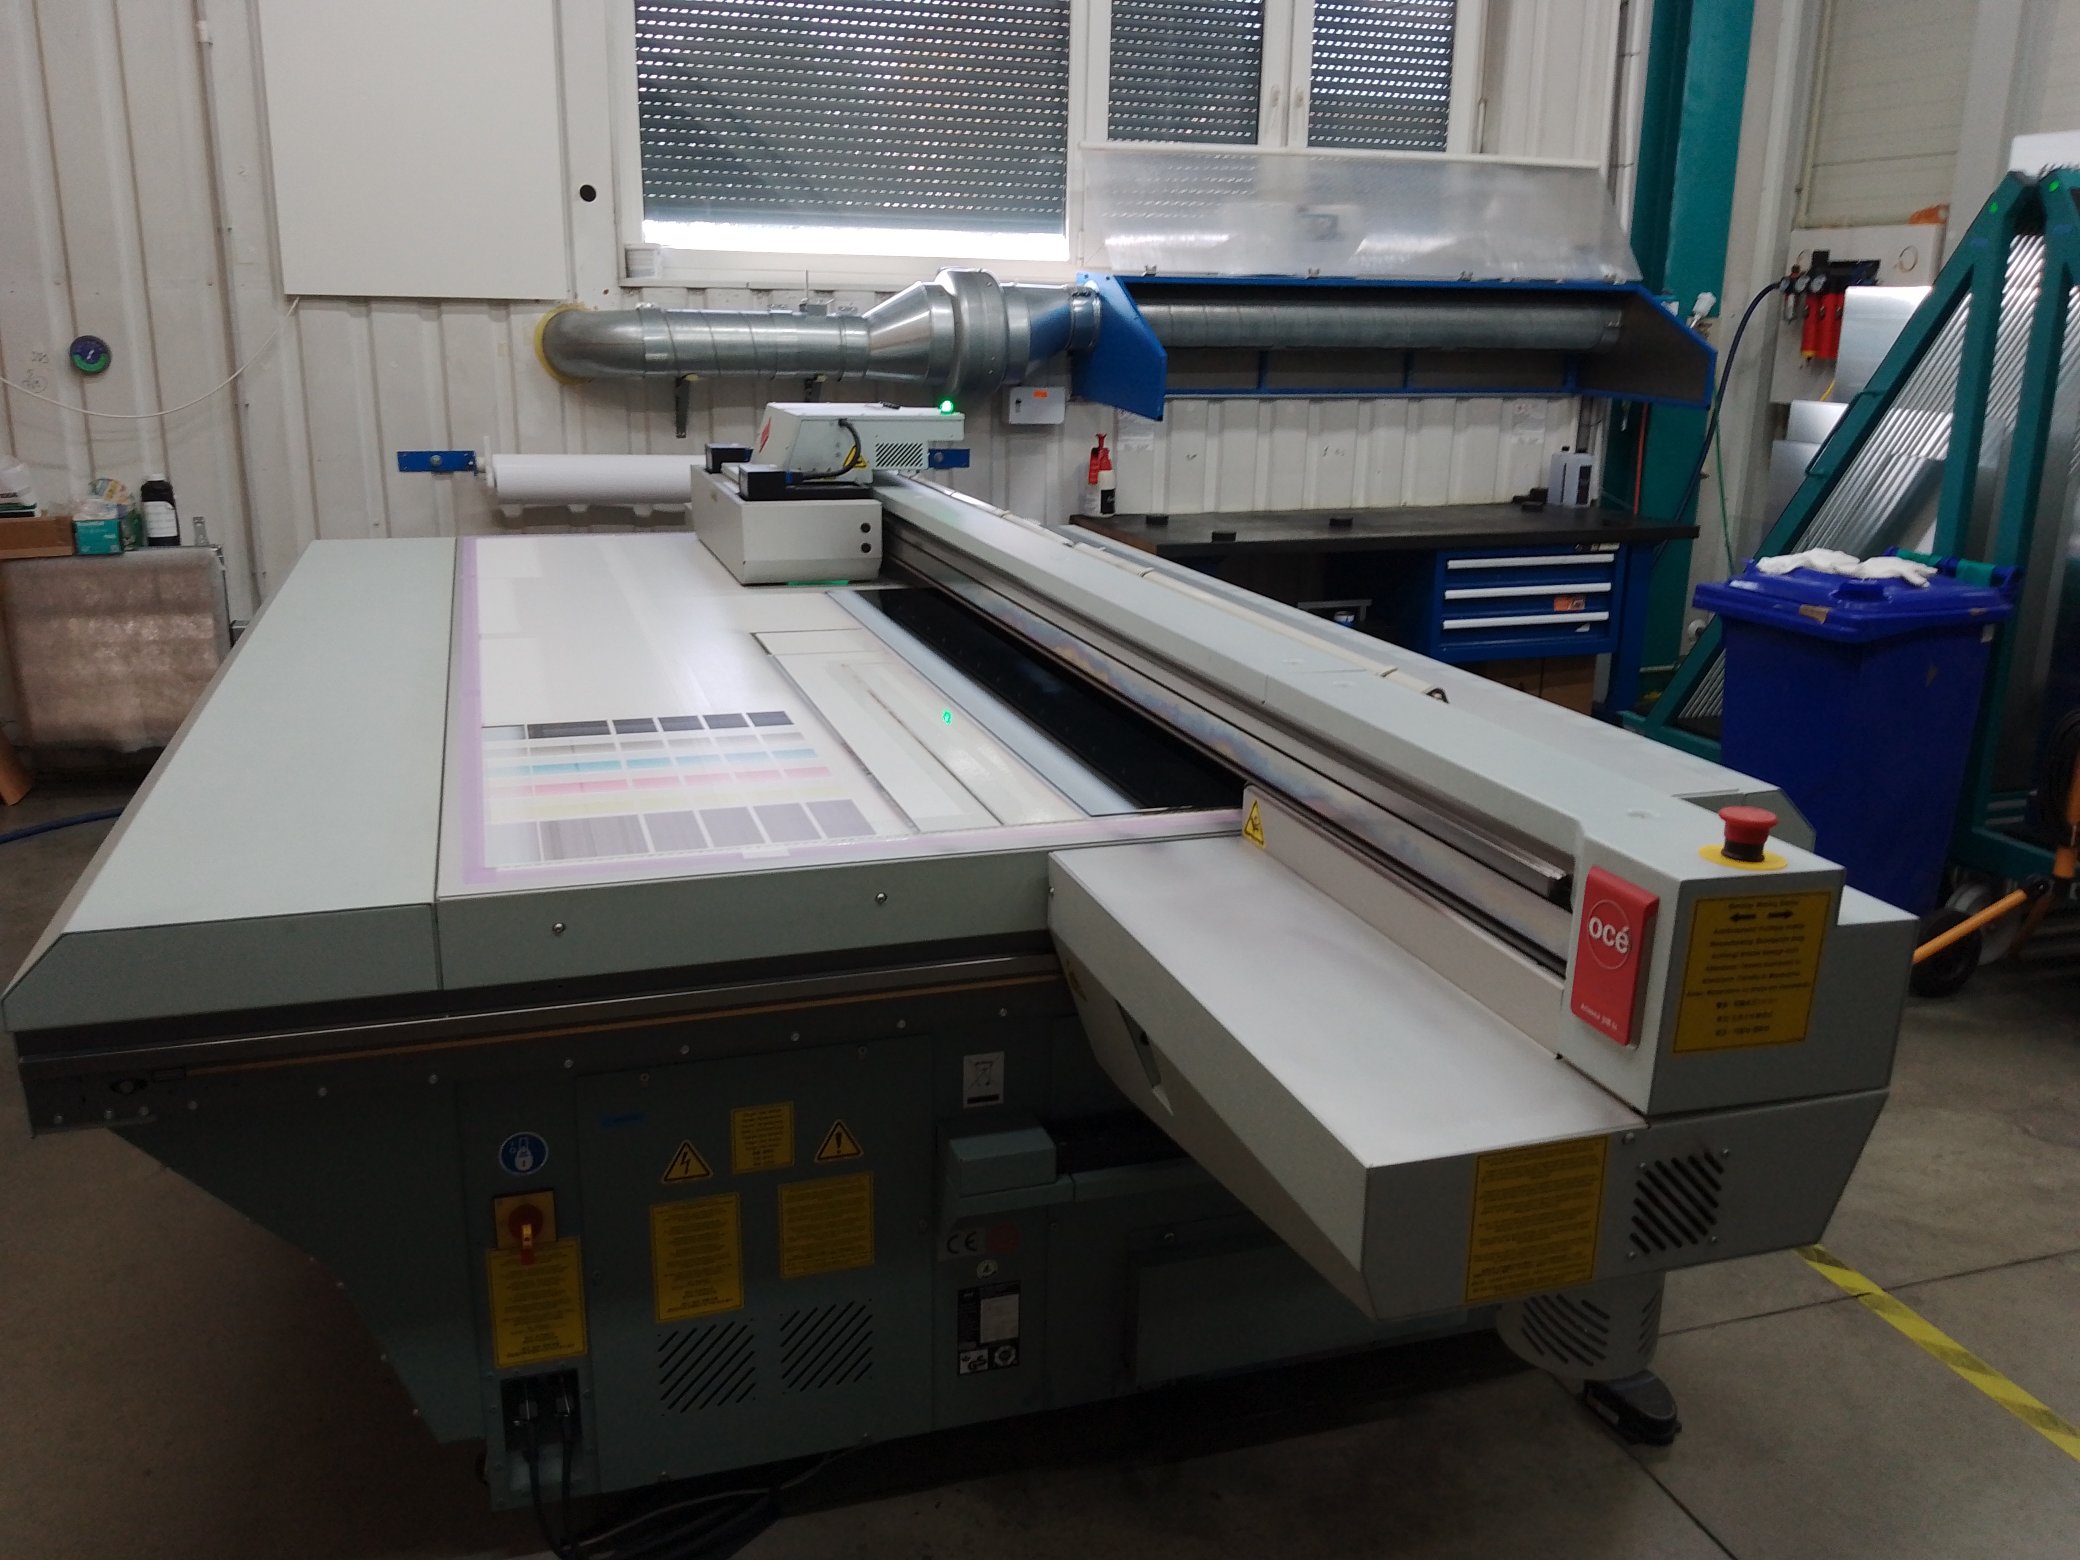 Picture panel being printed